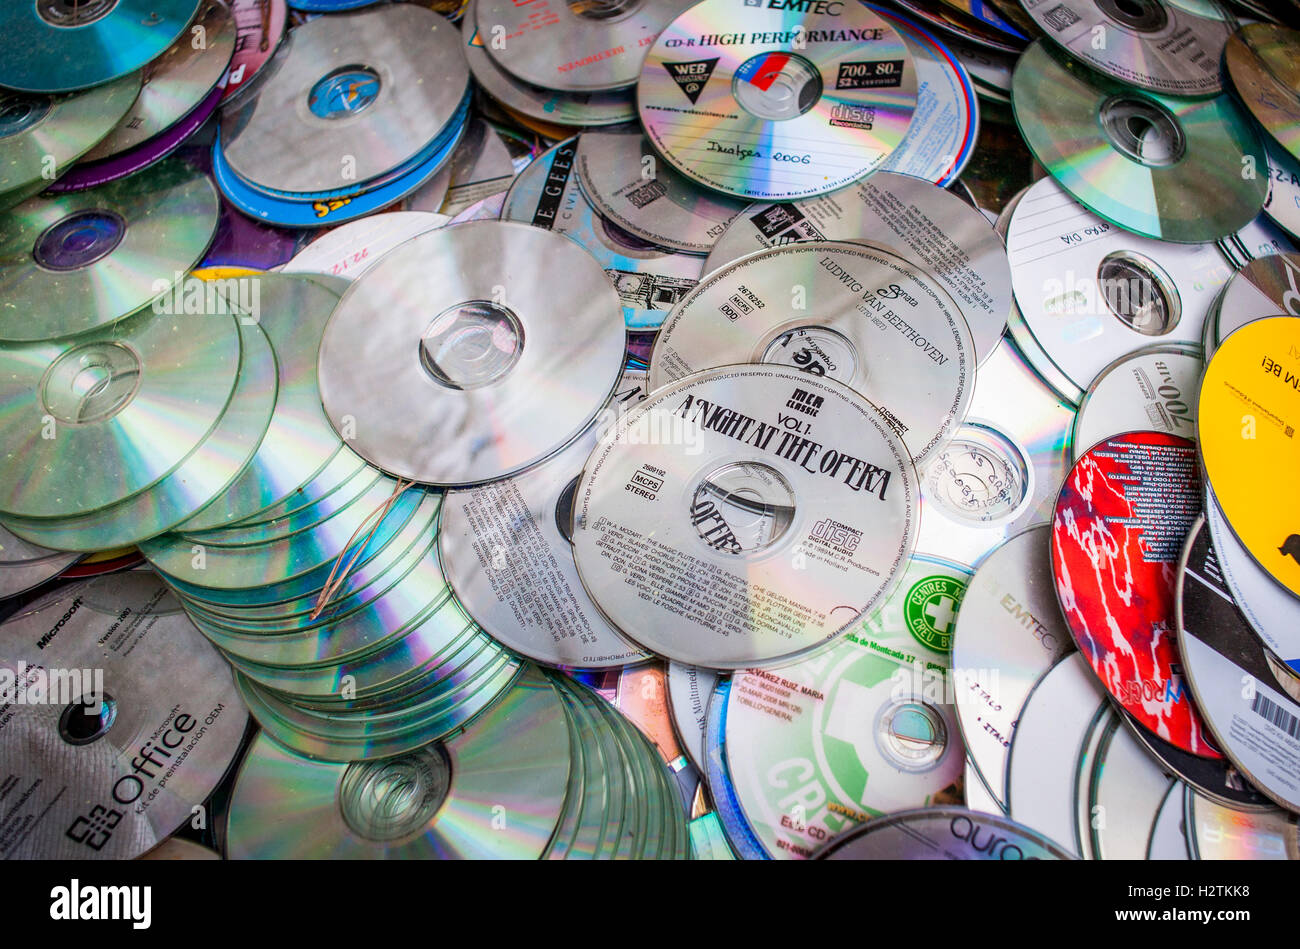 CD's storage to recycle, recycling center Stock Photo - Alamy